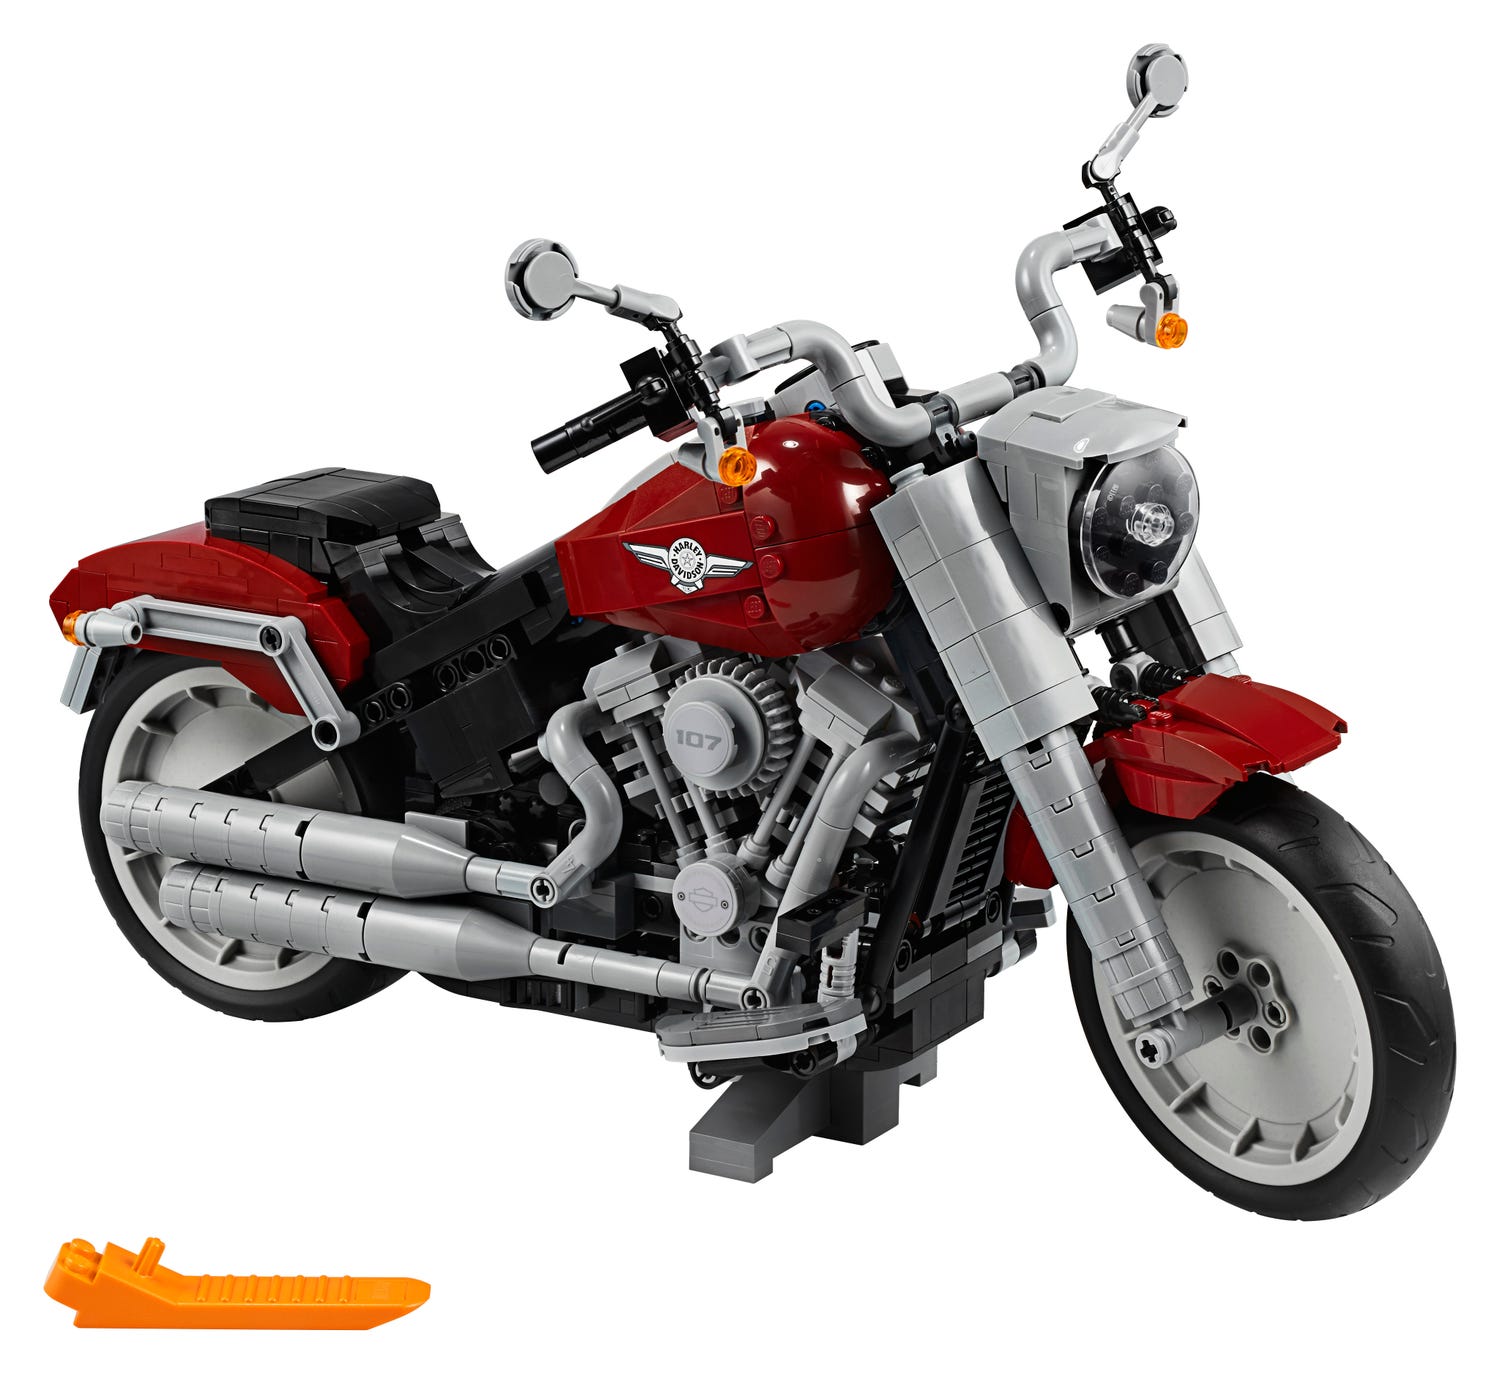 Harley Davidson Fat Boy 10269 Creator Expert Buy Online At The Official Lego Shop Be